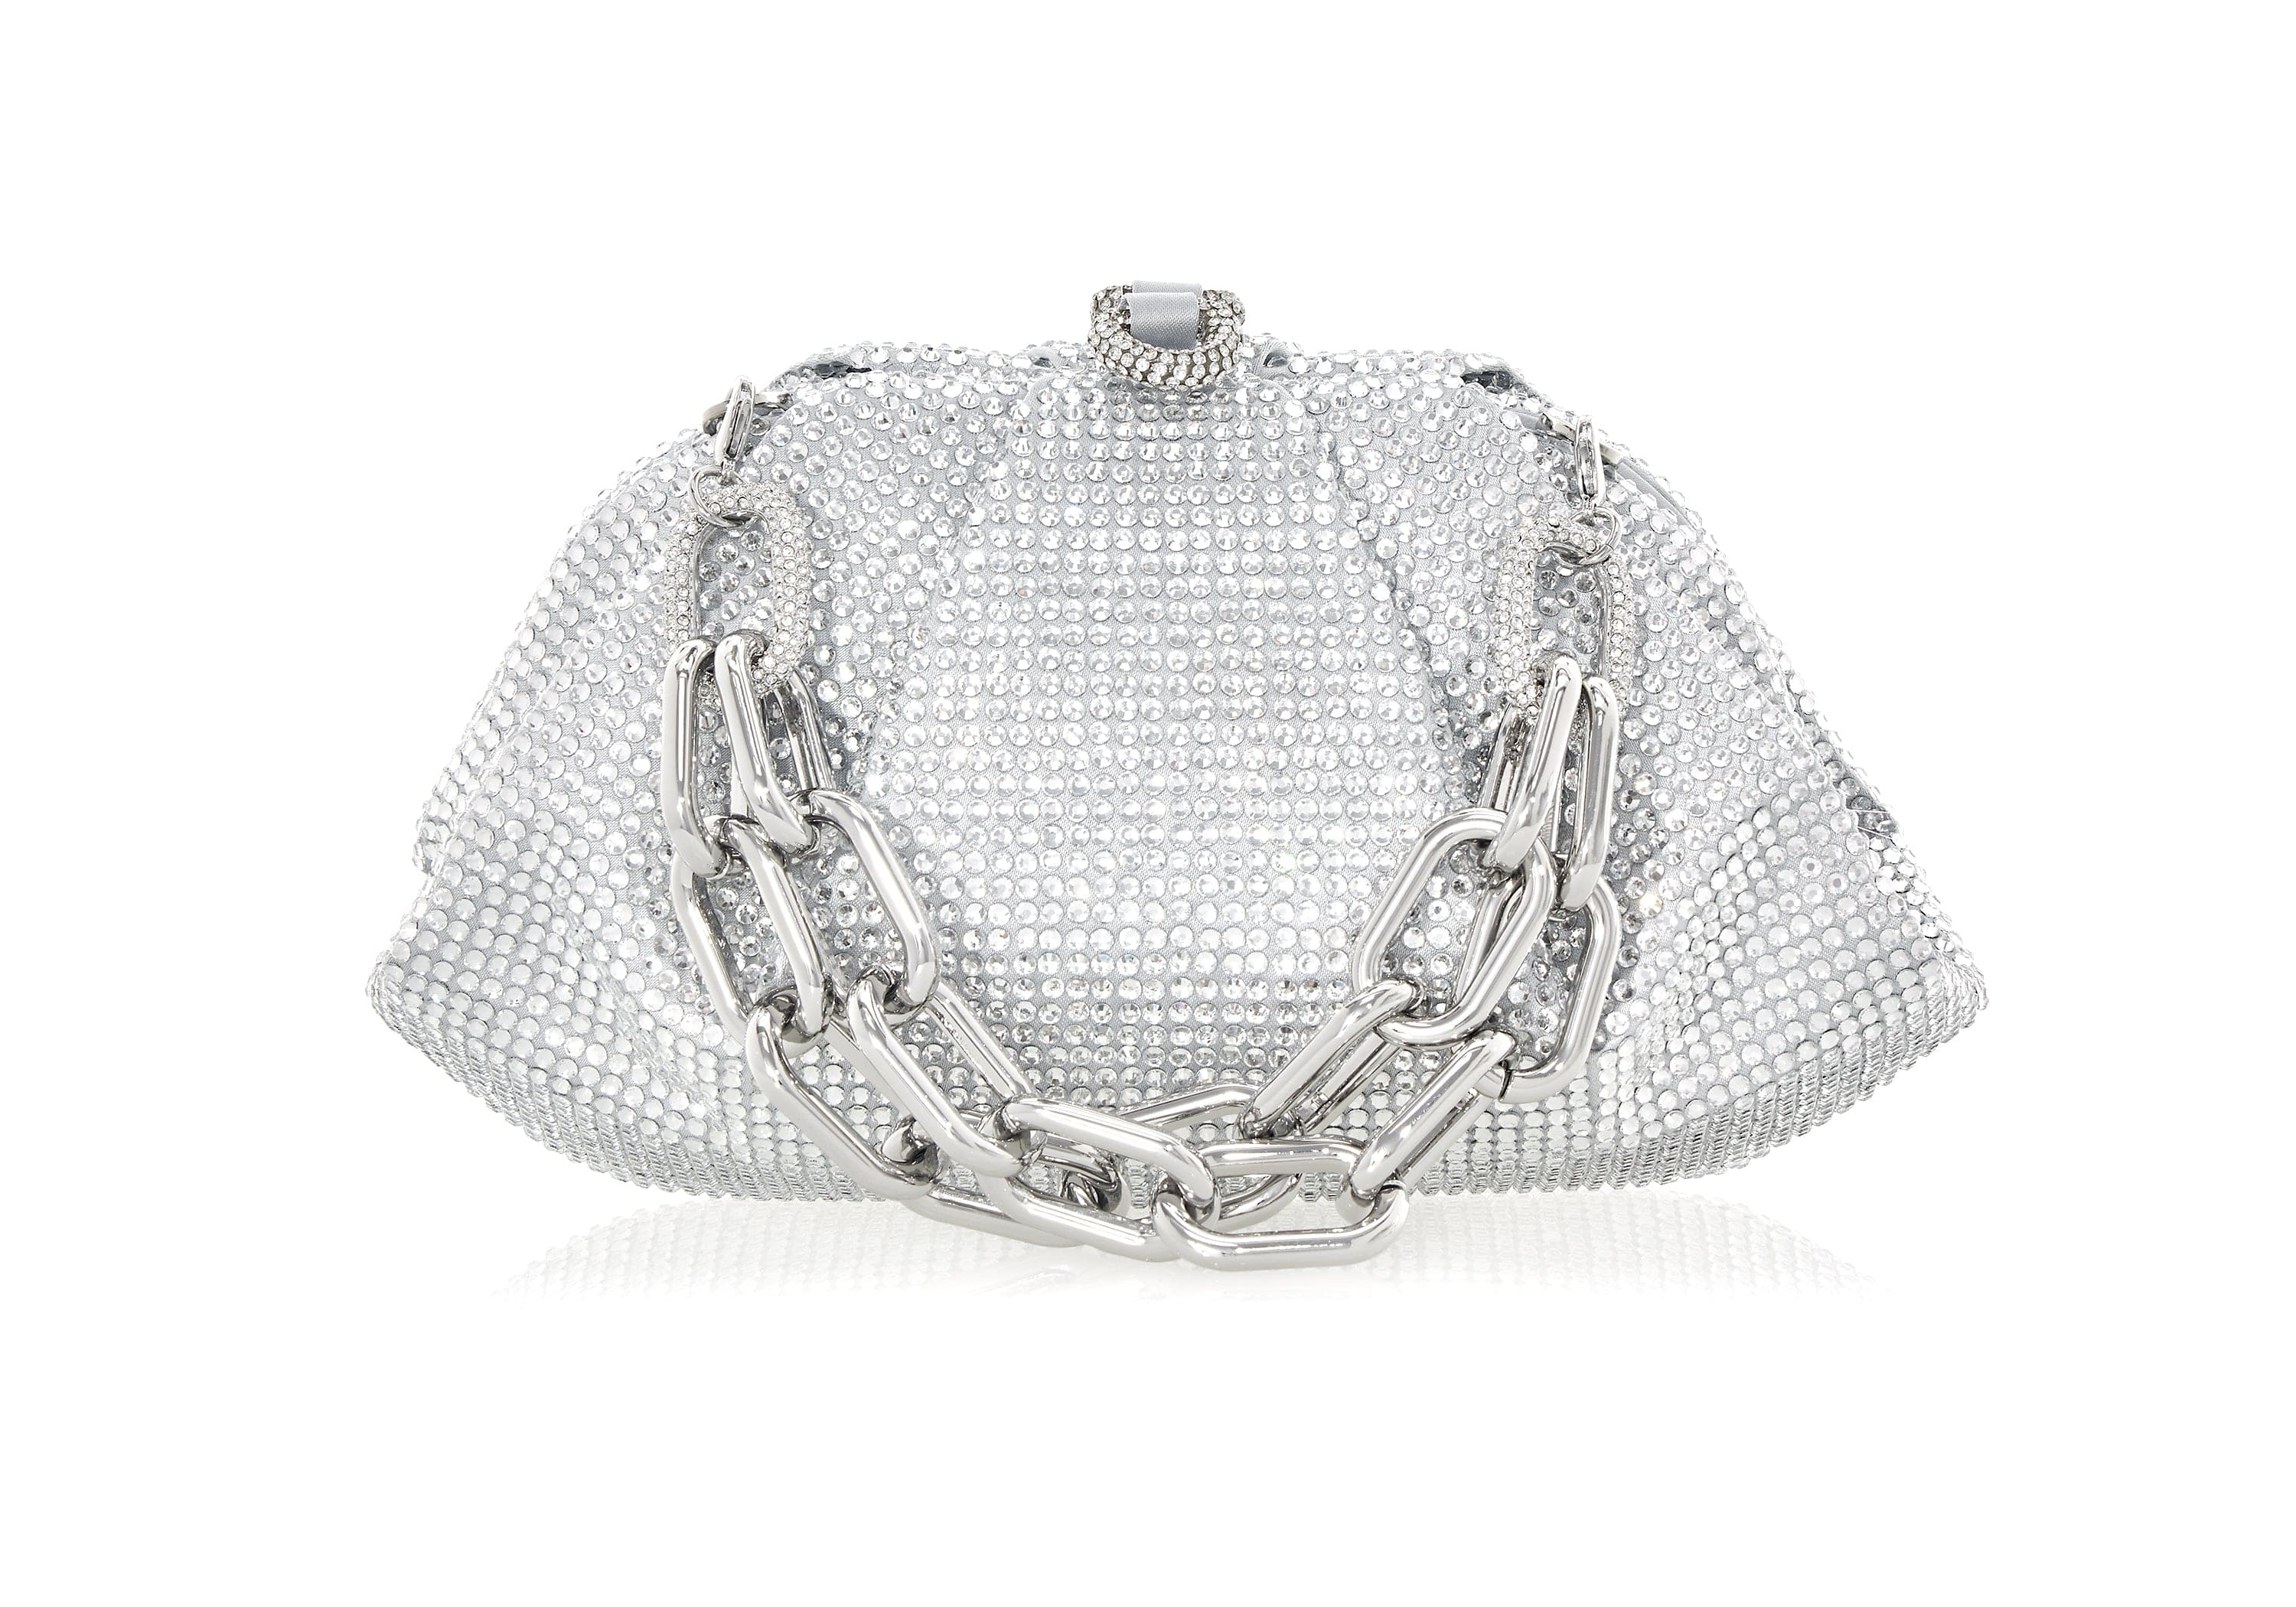 Buy Shiny Silver Fringe Potli Bag, Handbag With Eye Catching Design and  Handcrafted Tassels for Indian Wedding, Evening Party and Ethnic Wear.  Online in India - Etsy